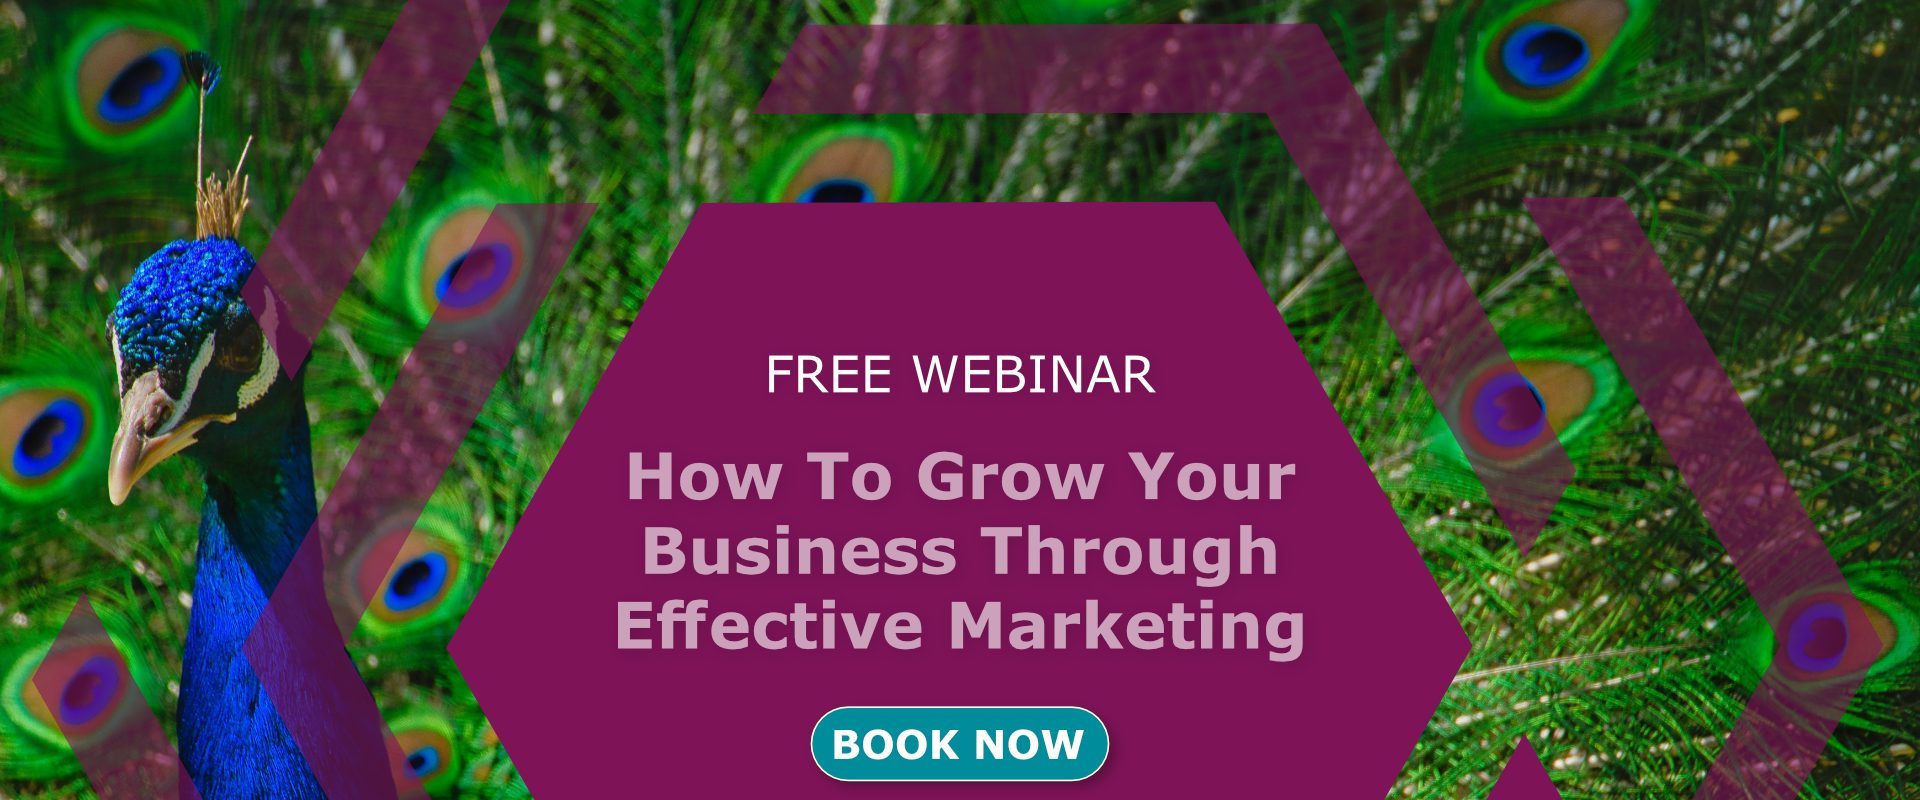 How To Grow Your Business Through Effective Marketing